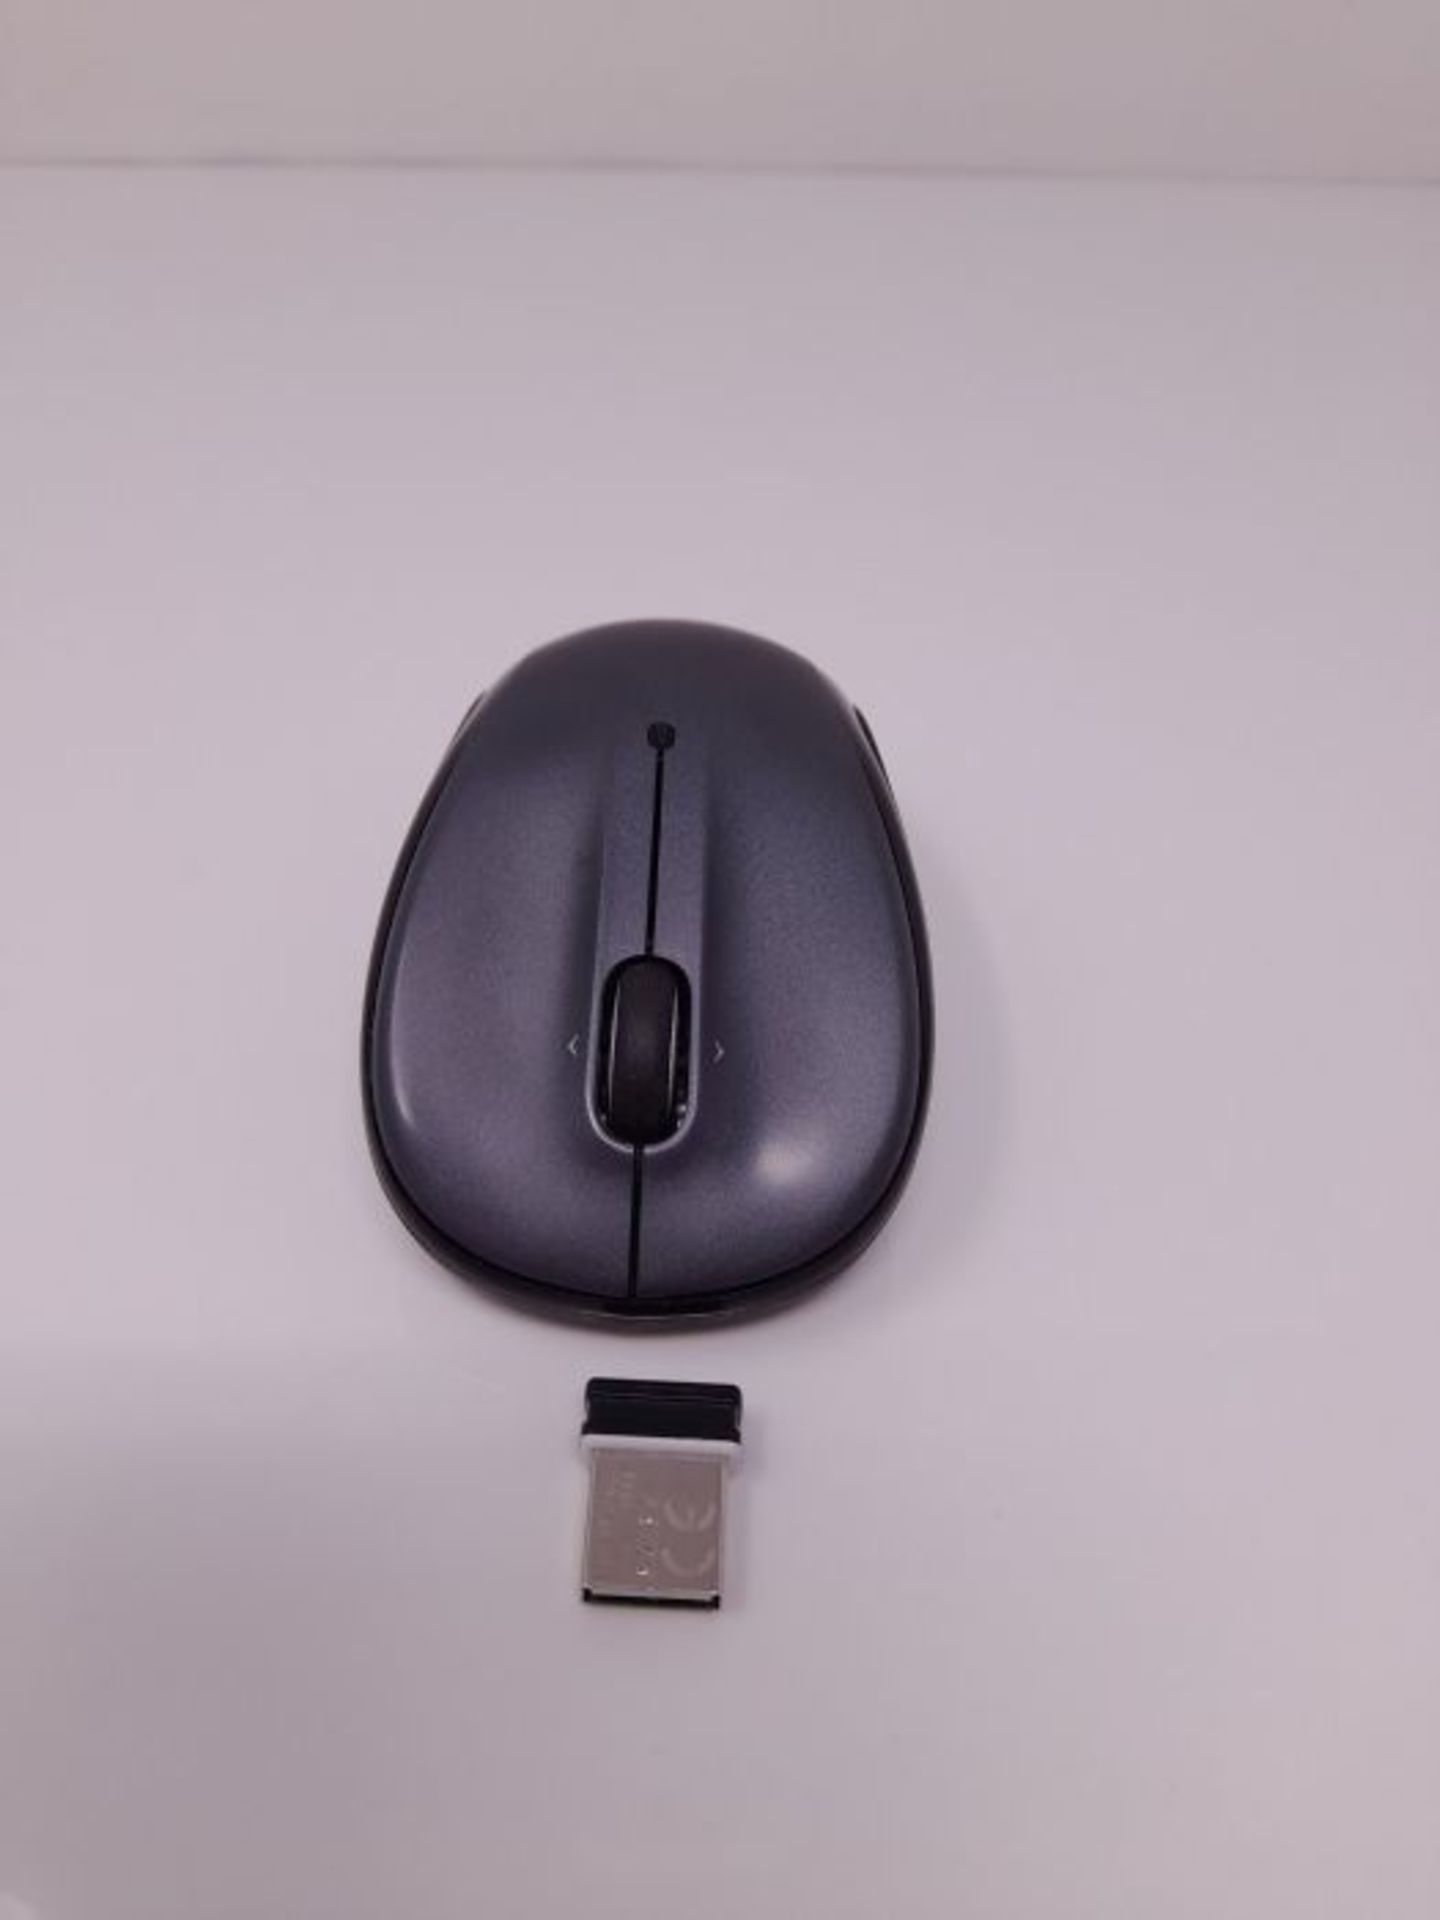 Logitech M325 Wireless Mouse, 2.4 GHz with USB Unifying Receiver, 1000 DPI Optical Tra - Image 2 of 3